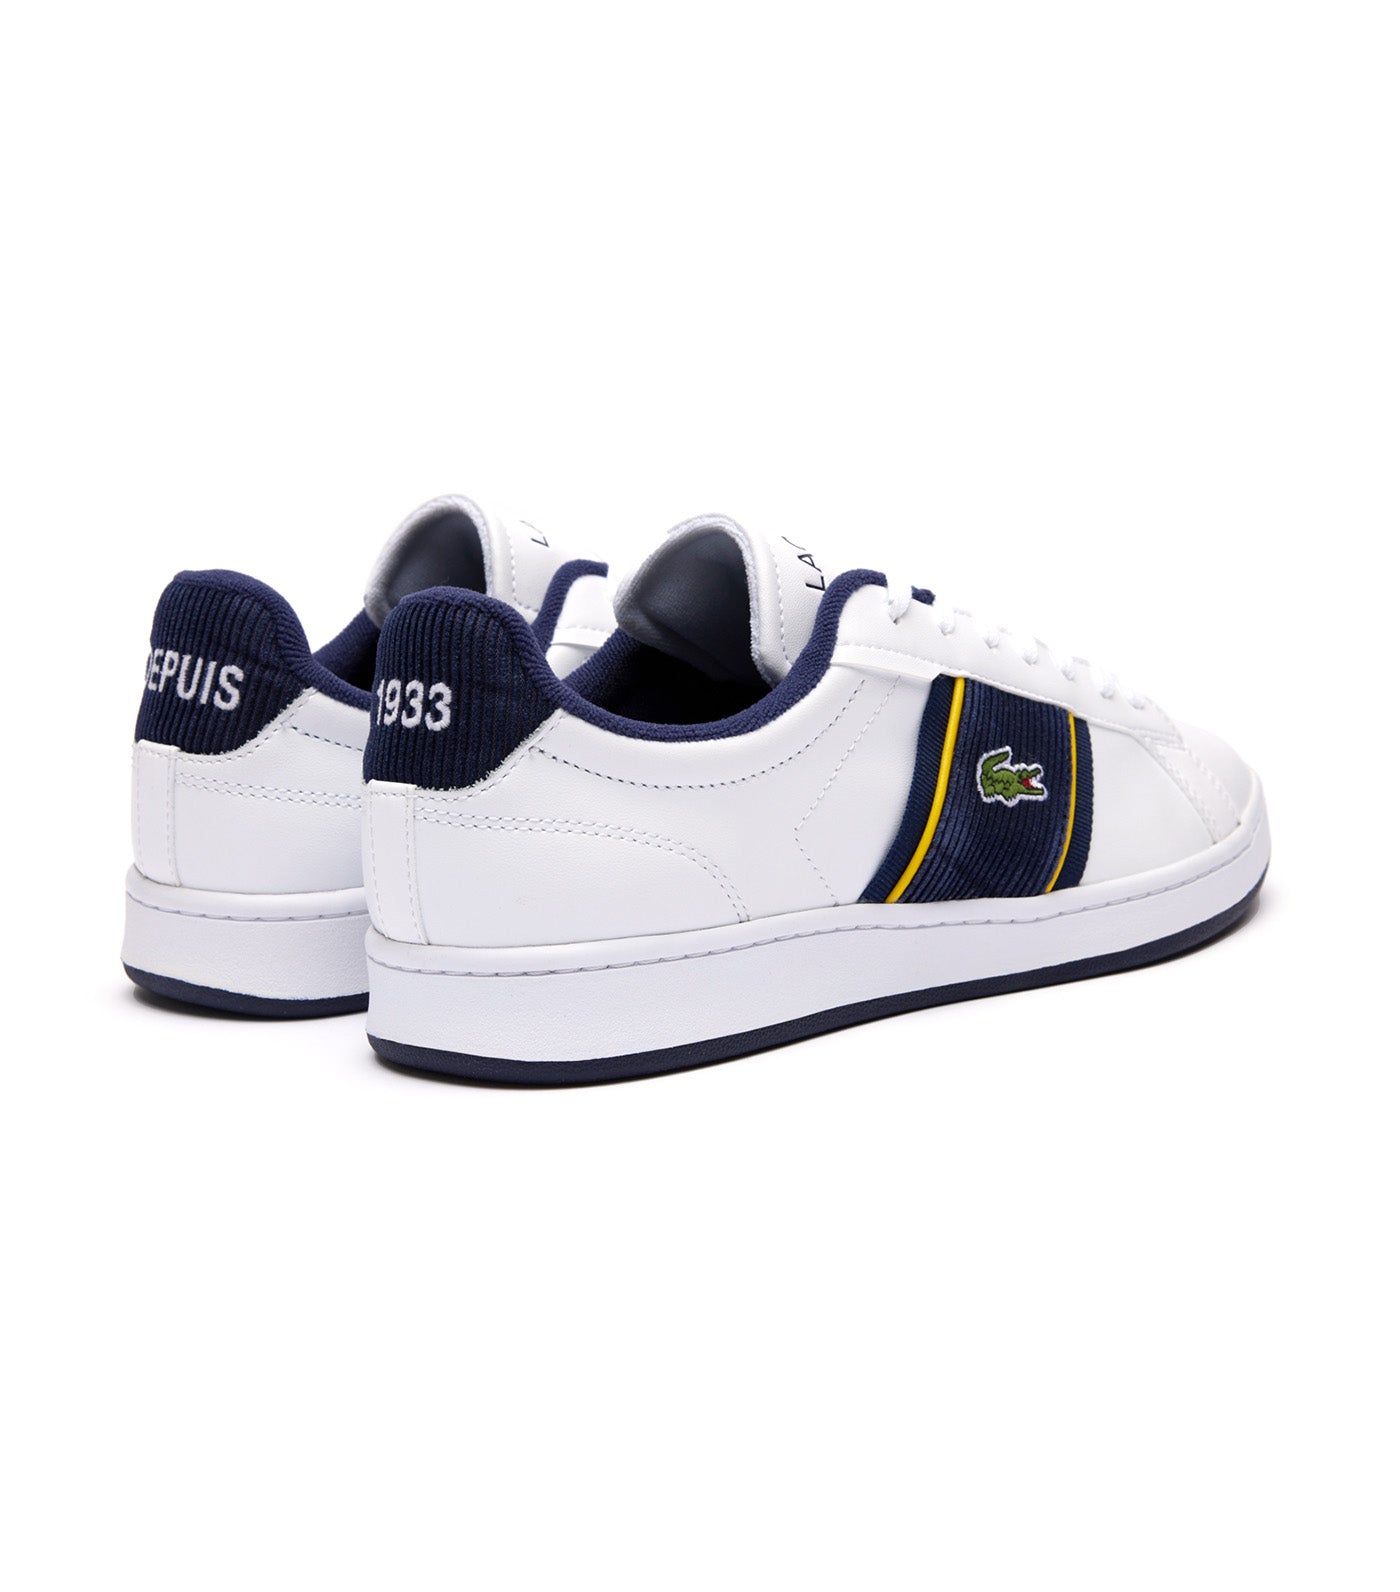 Men's Carnaby Pro CGR Bar Corduroy Detail Trainers White/Navy